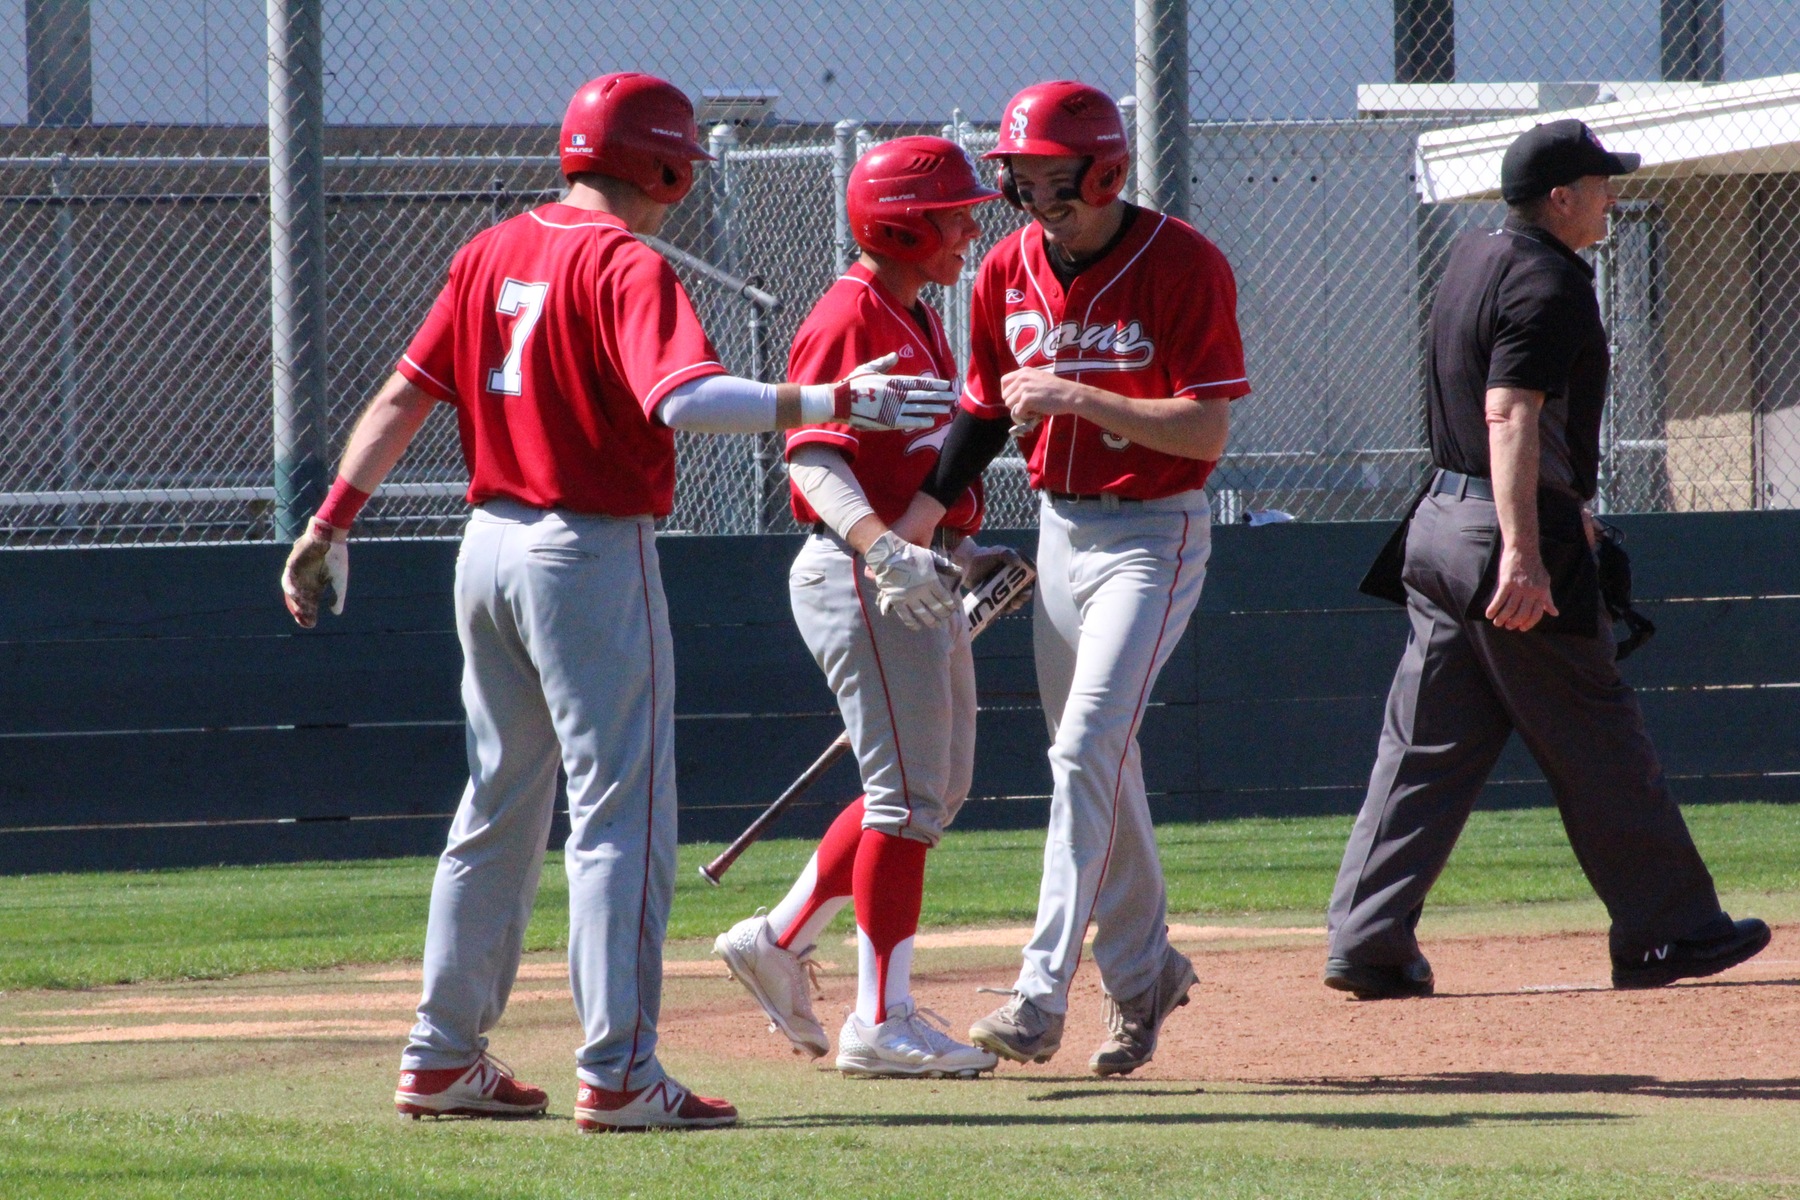 Dons Roll to 12-3 Win Over Golden West